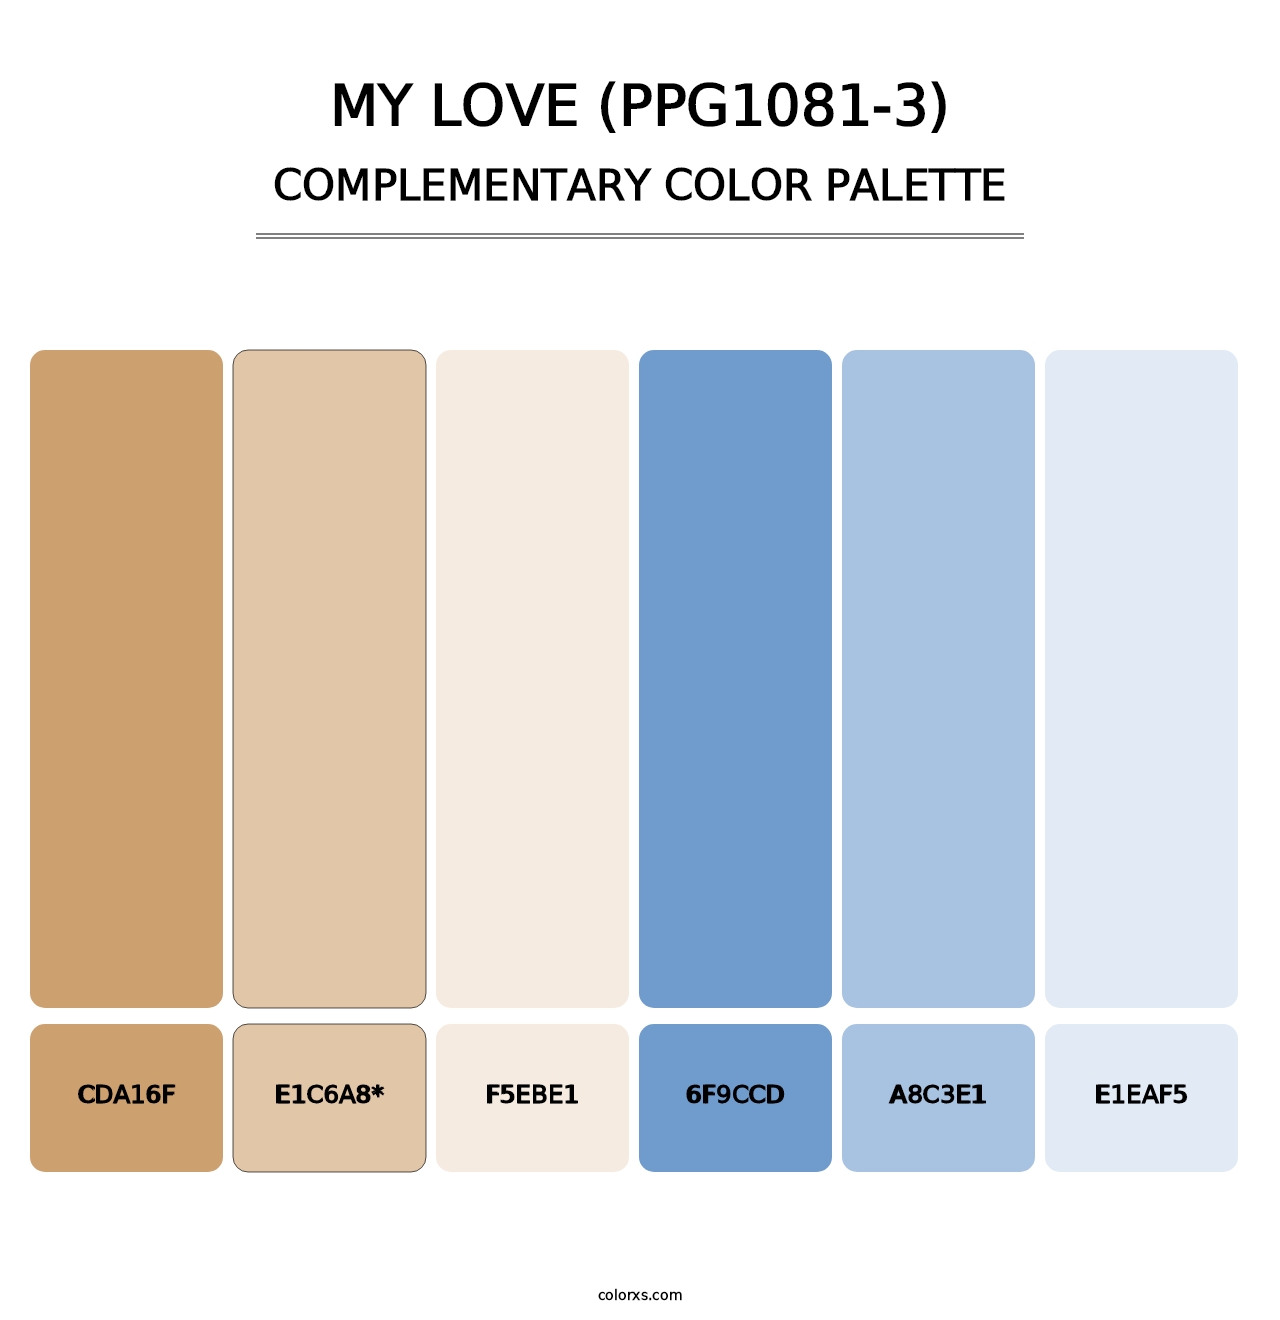 My Love (PPG1081-3) - Complementary Color Palette